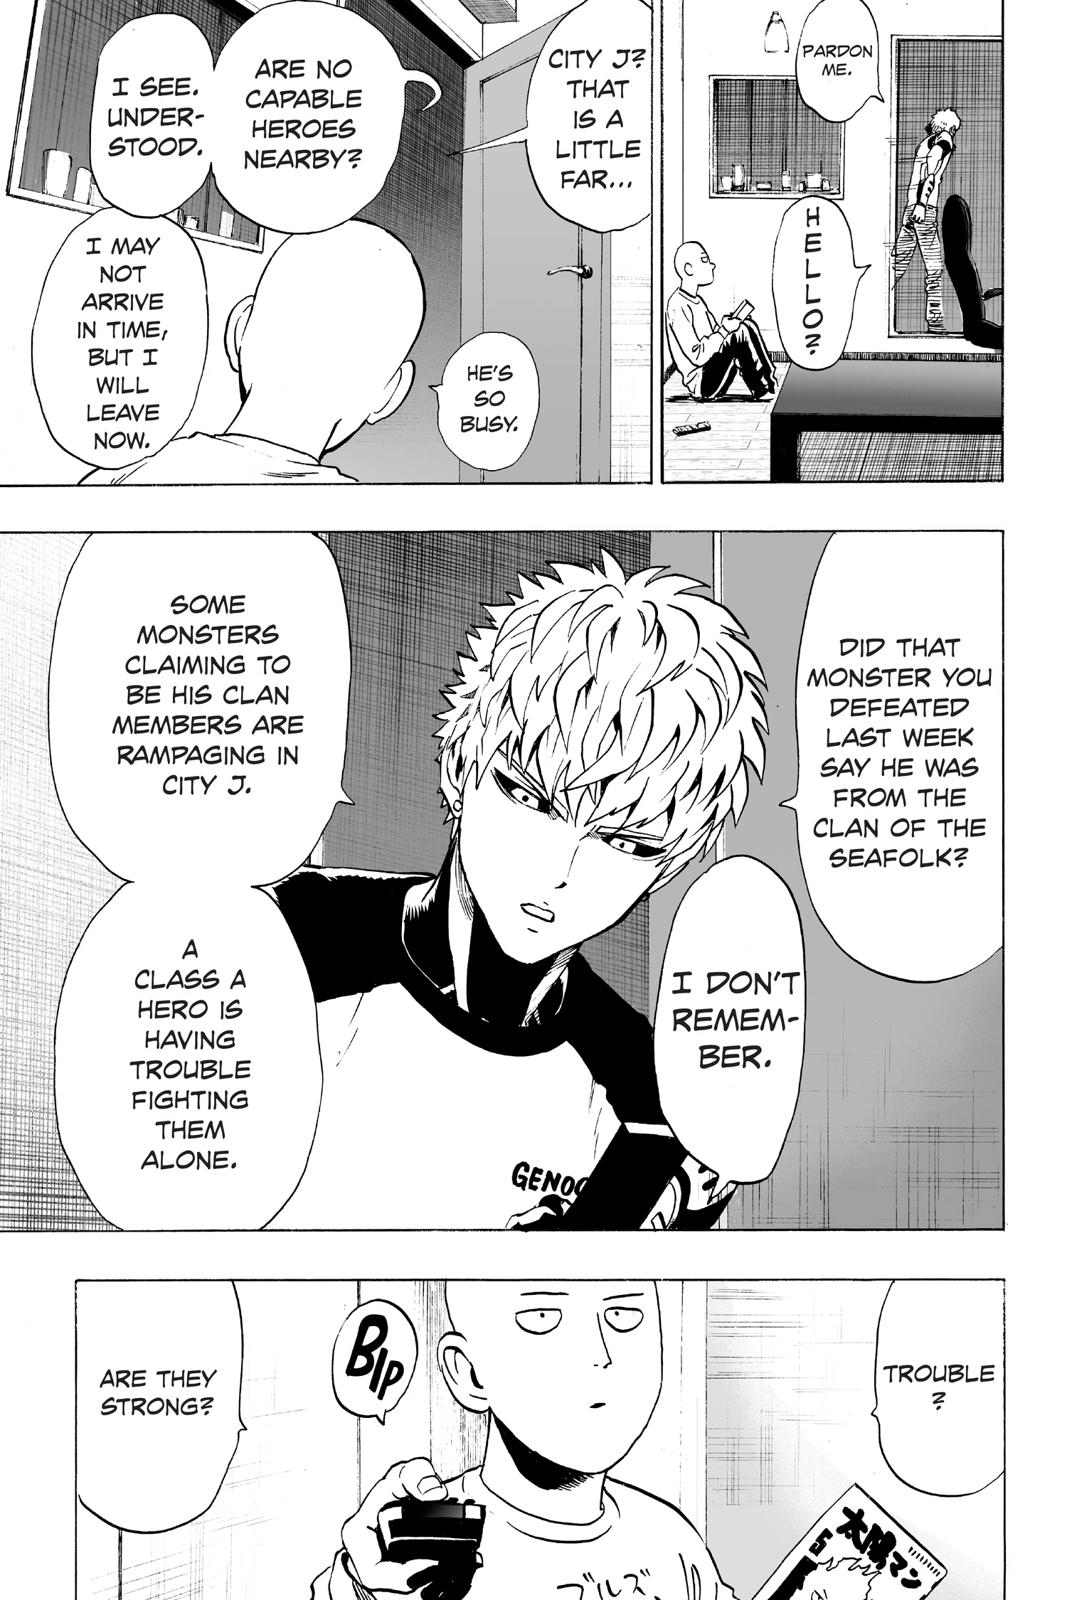 One-Punch Man, Punch 23 image 15